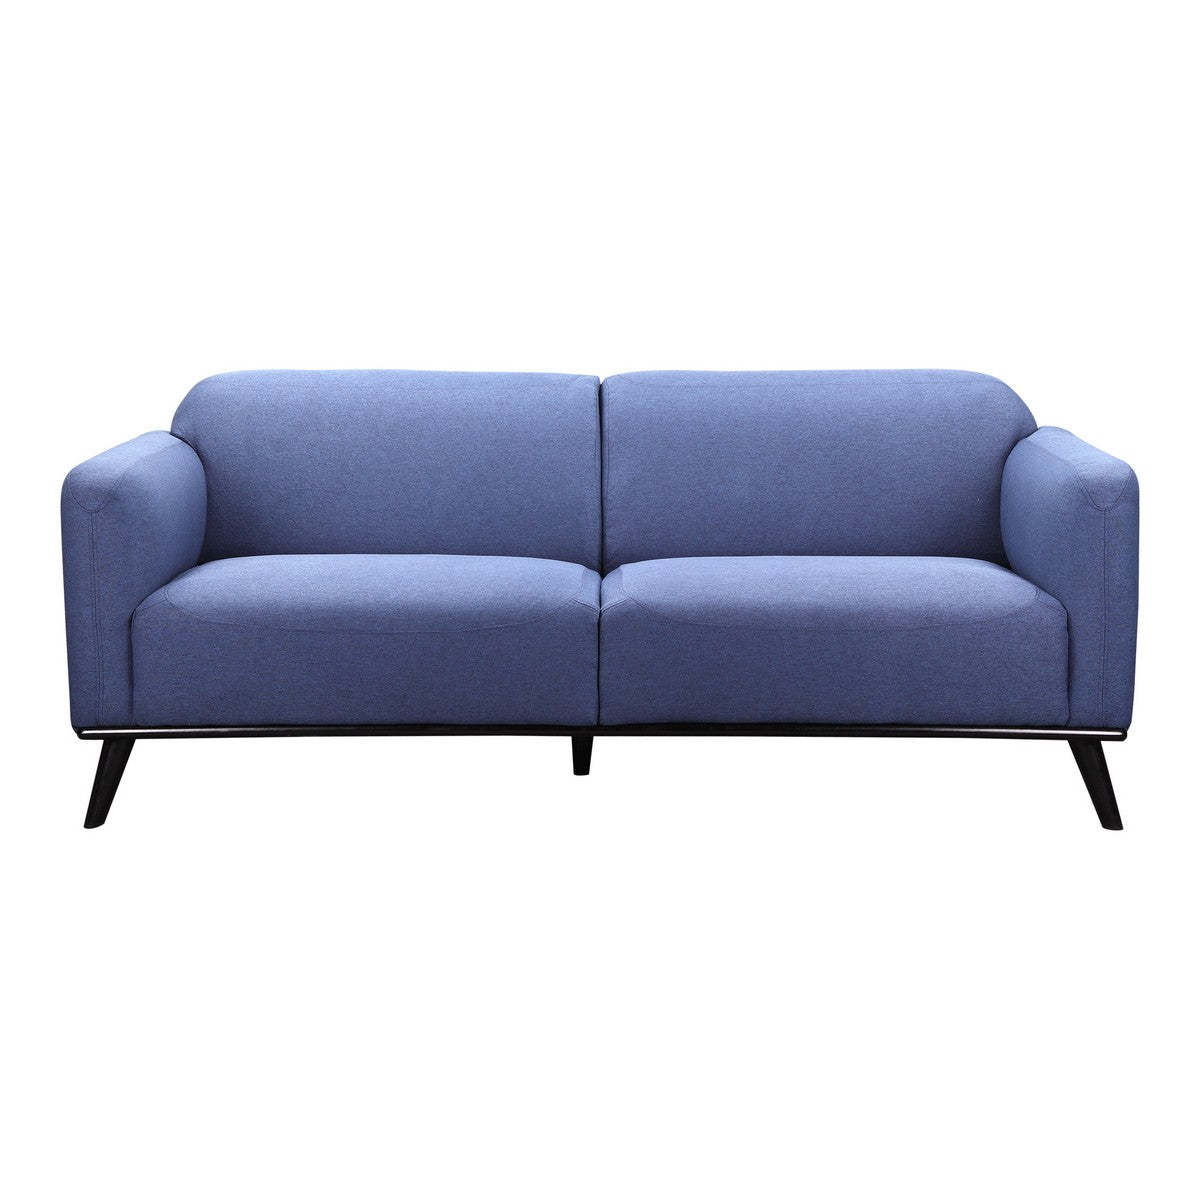 Moe's Home Collection Peppy Sofa Blue - FW-1006-26 - Moe's Home Collection - Sofas - Minimal And Modern - 1